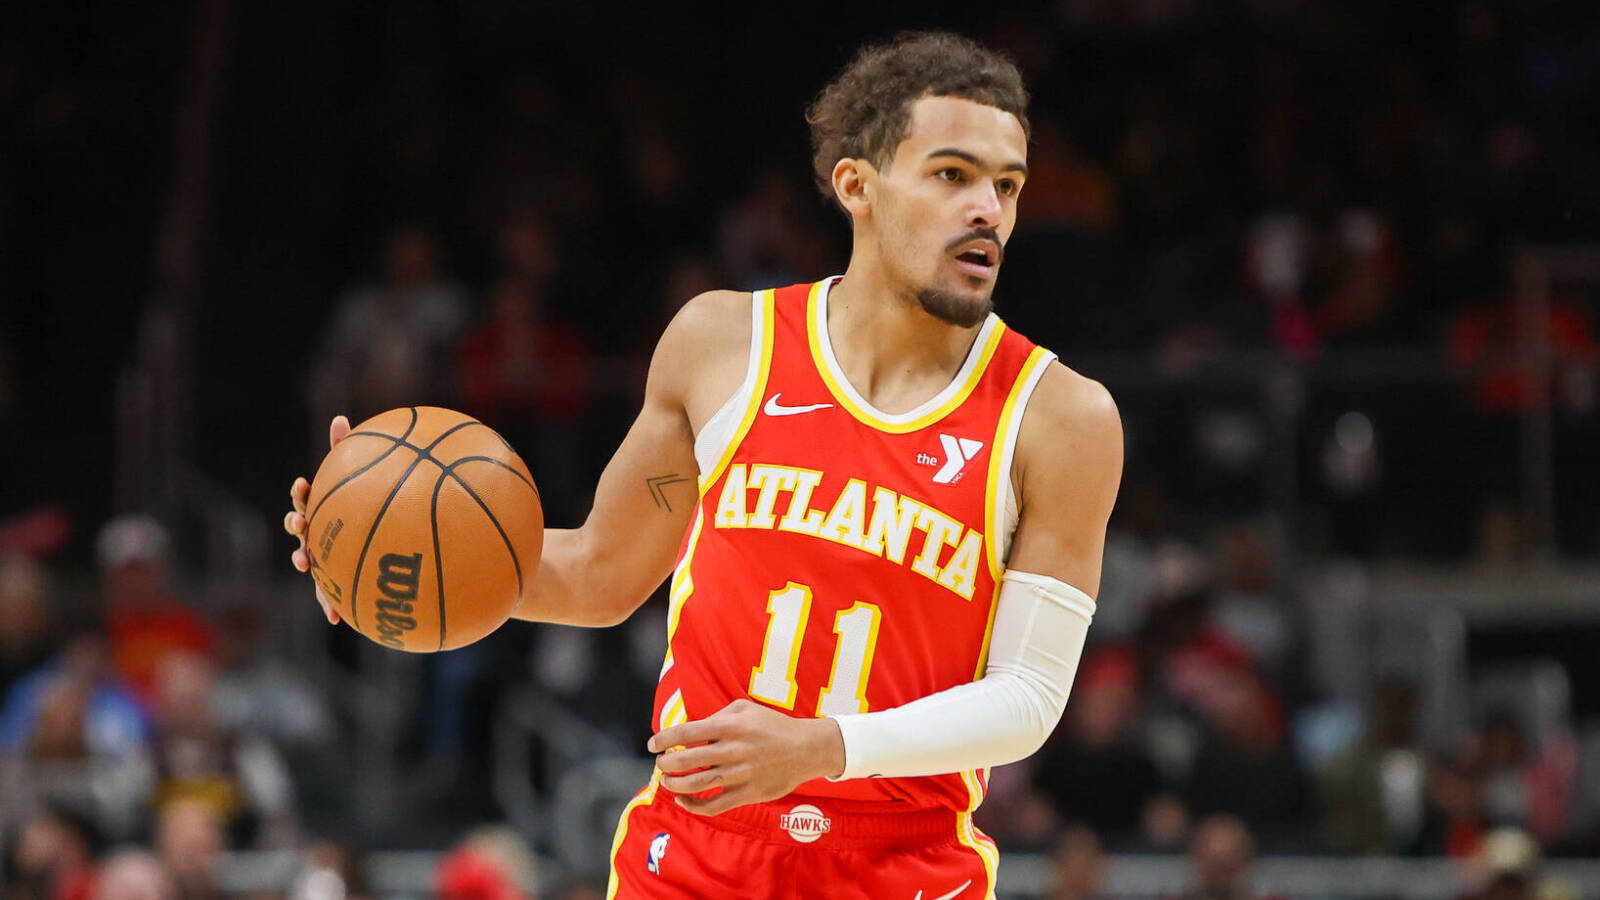 Trae Young's future with Hawks is far from certain